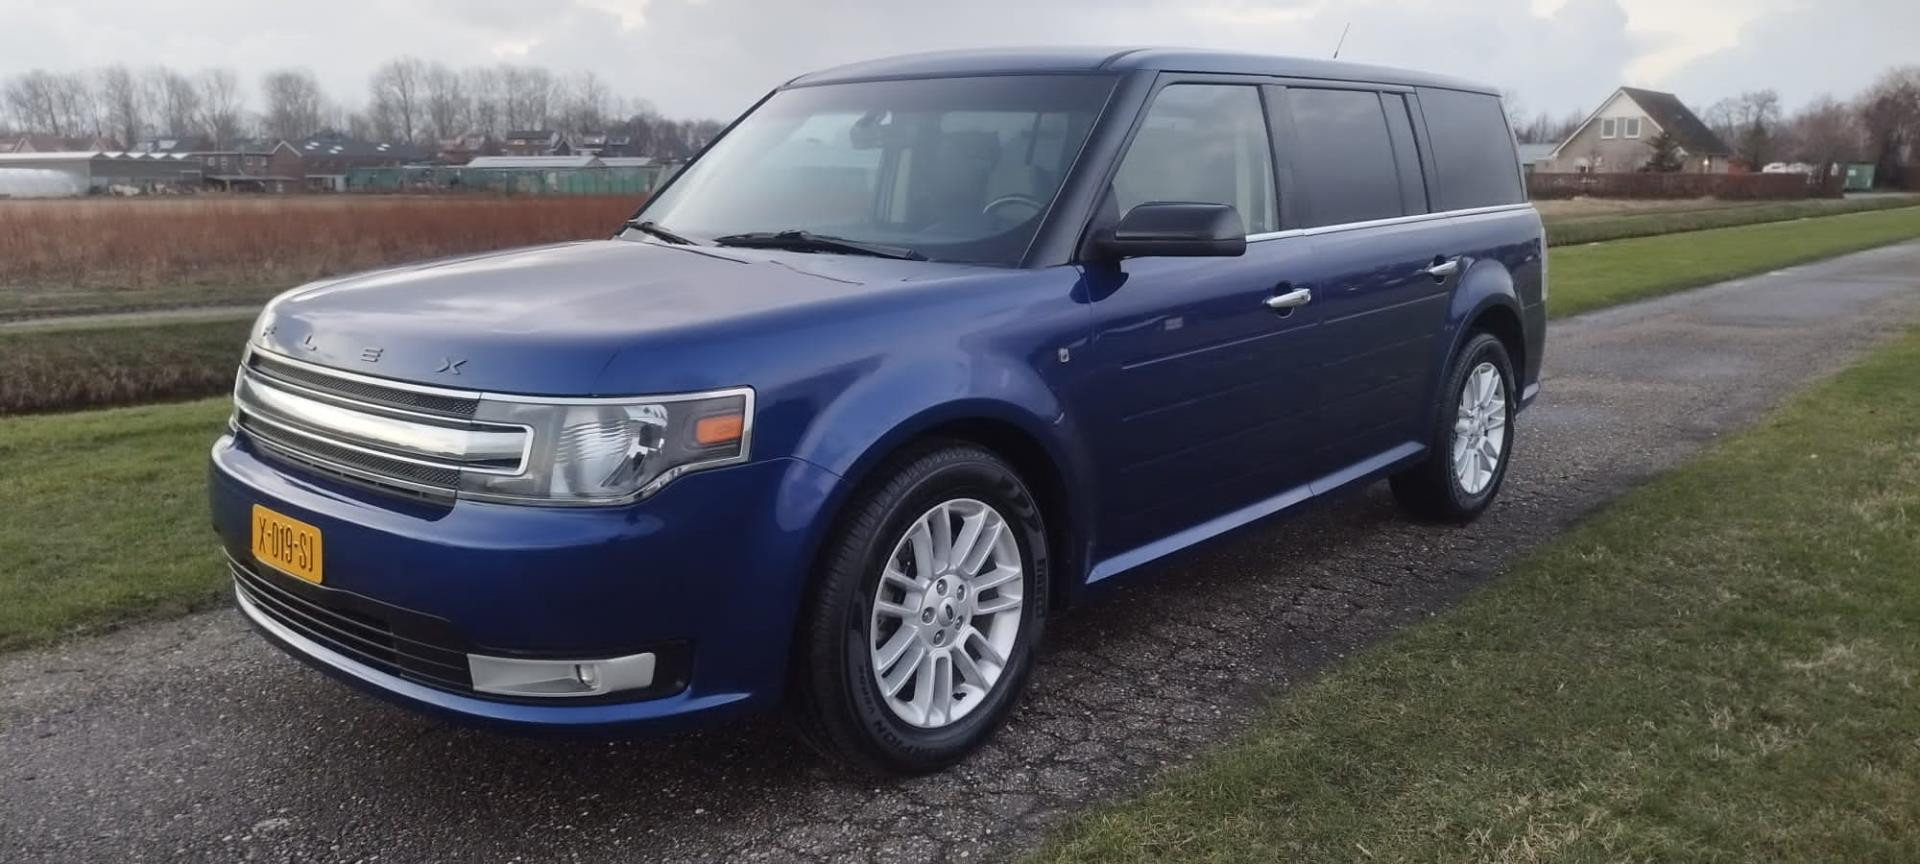 Ford FLEX 3.5 SEL AWD 7-persoons 41000 km! bij viaBOVAG.nl